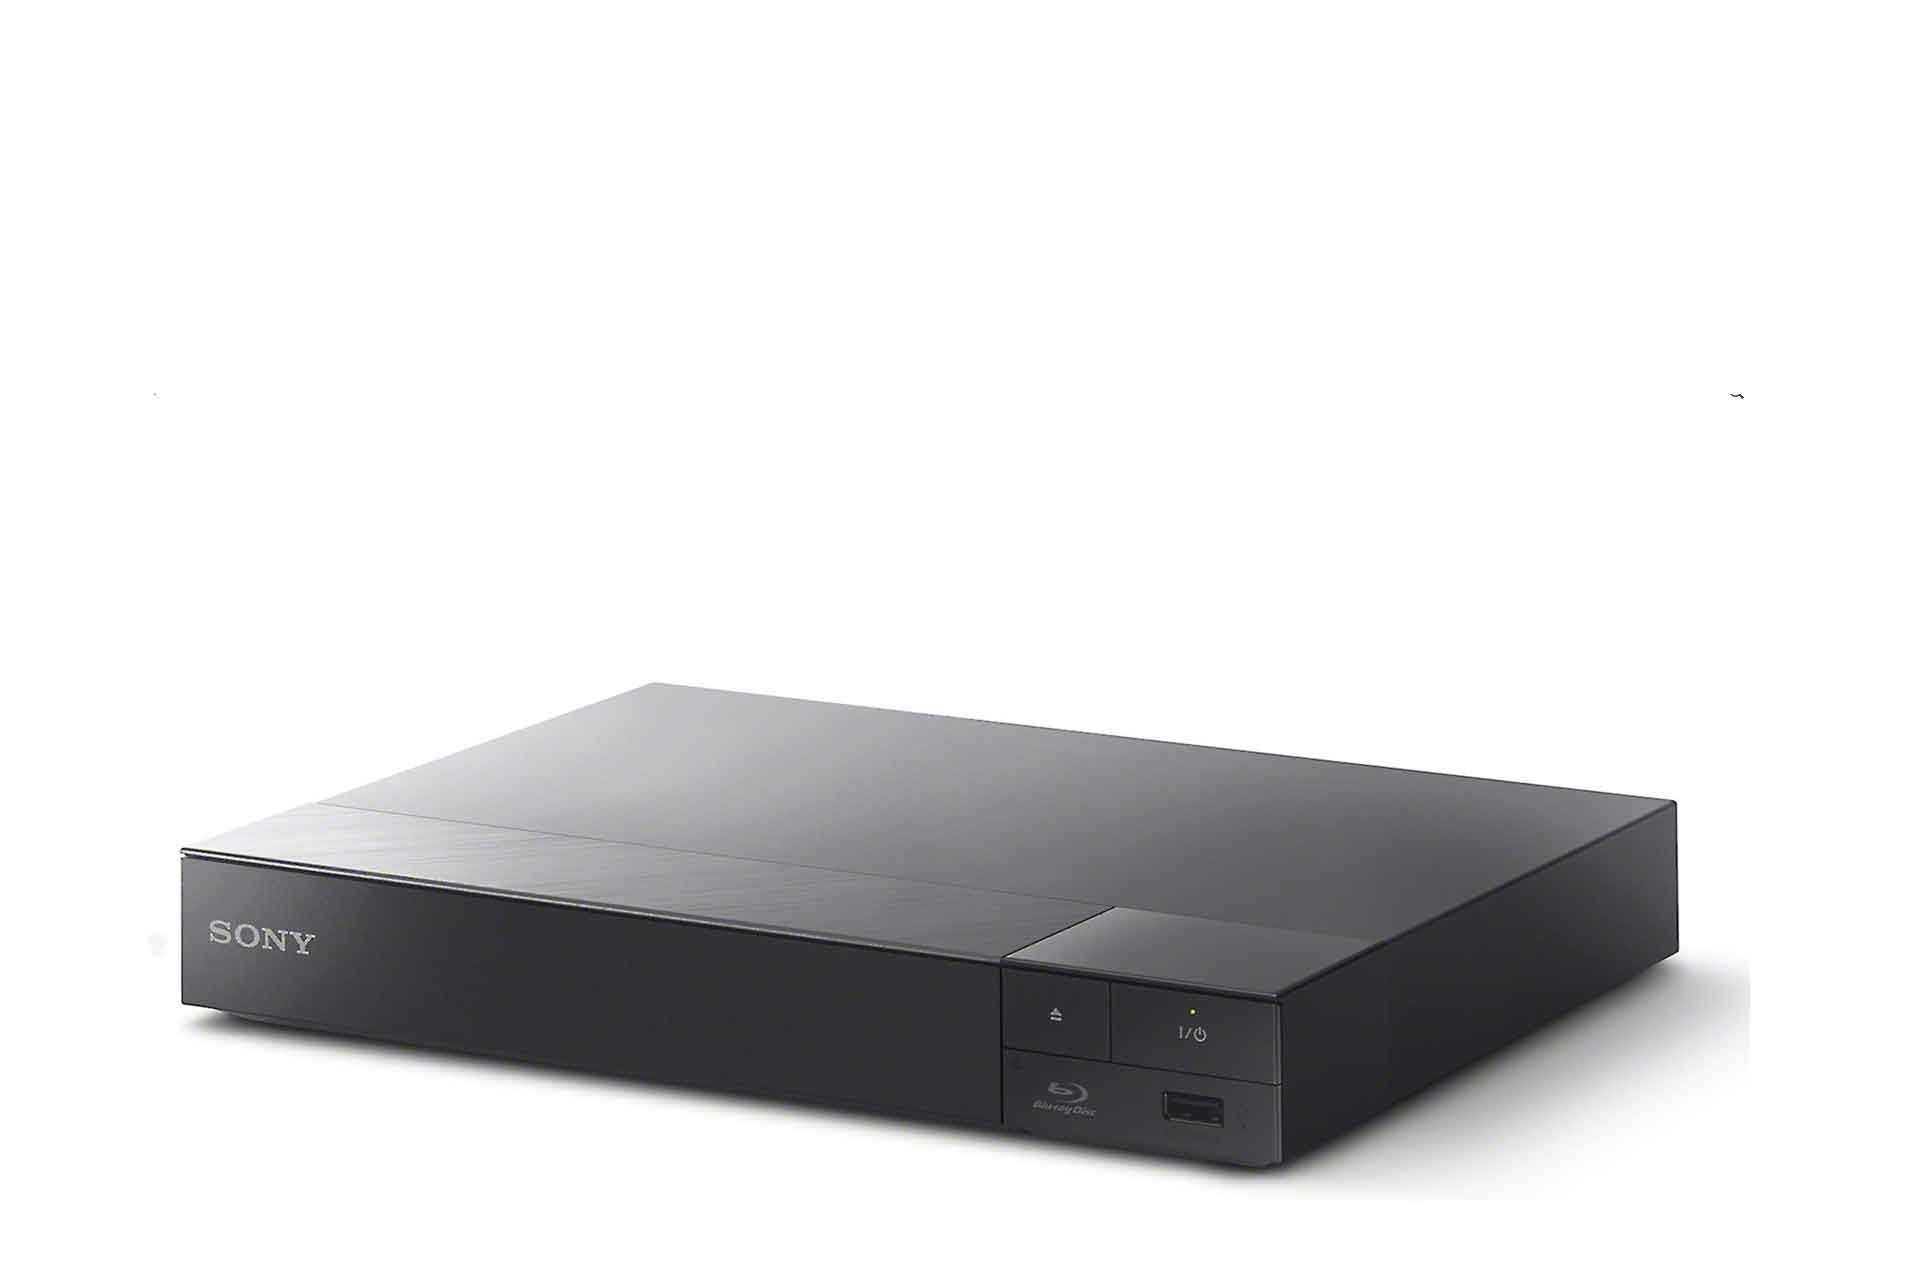 Sony BDP-S6700 Blu-ray Disc Player Reviewed - Future Audiophile Magazine